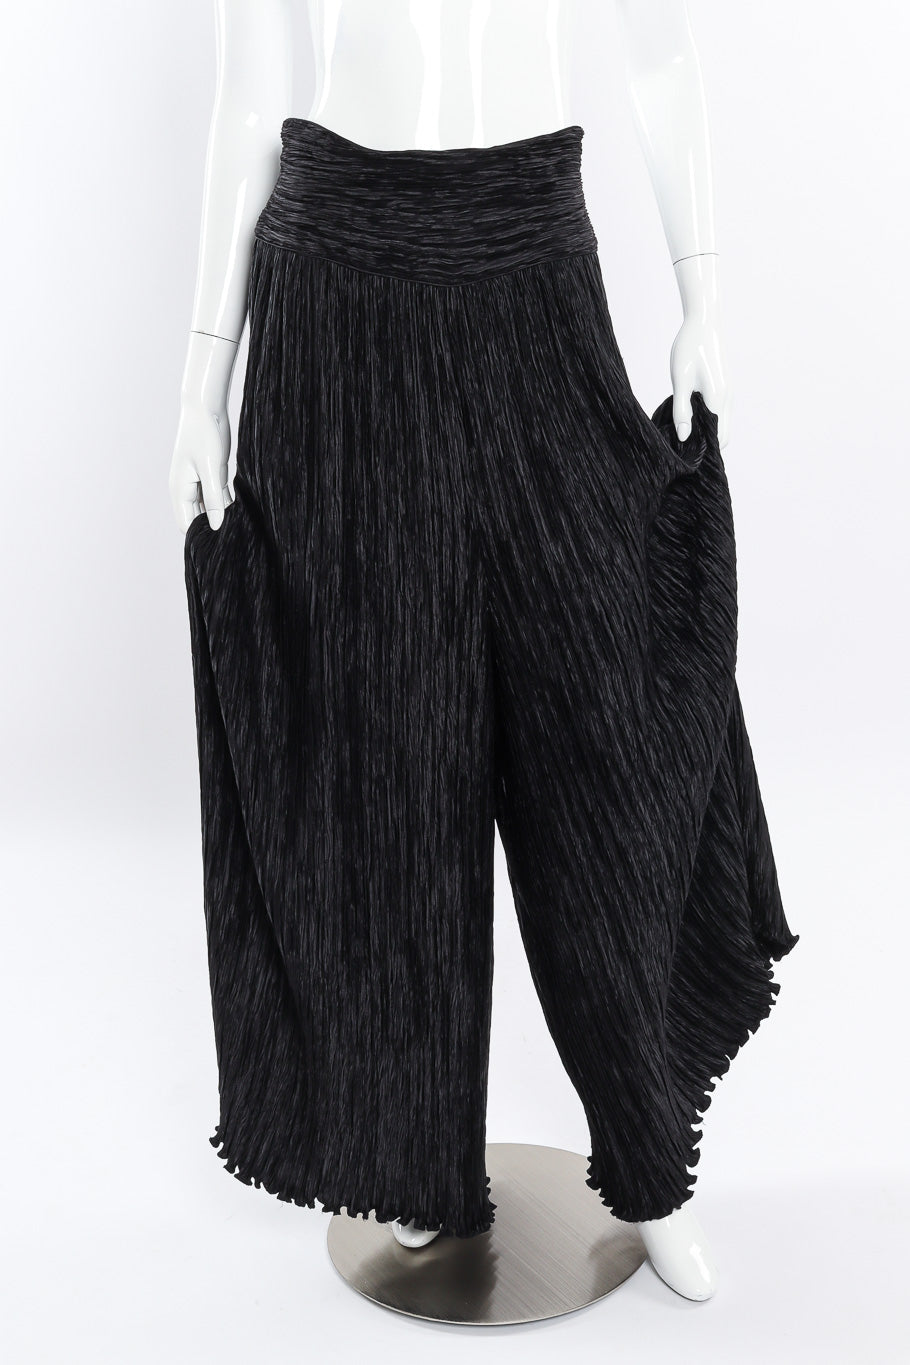 Pleated palazzo pant by Mary McFadden on mannequin front pulling out pant legs with hands @recessla